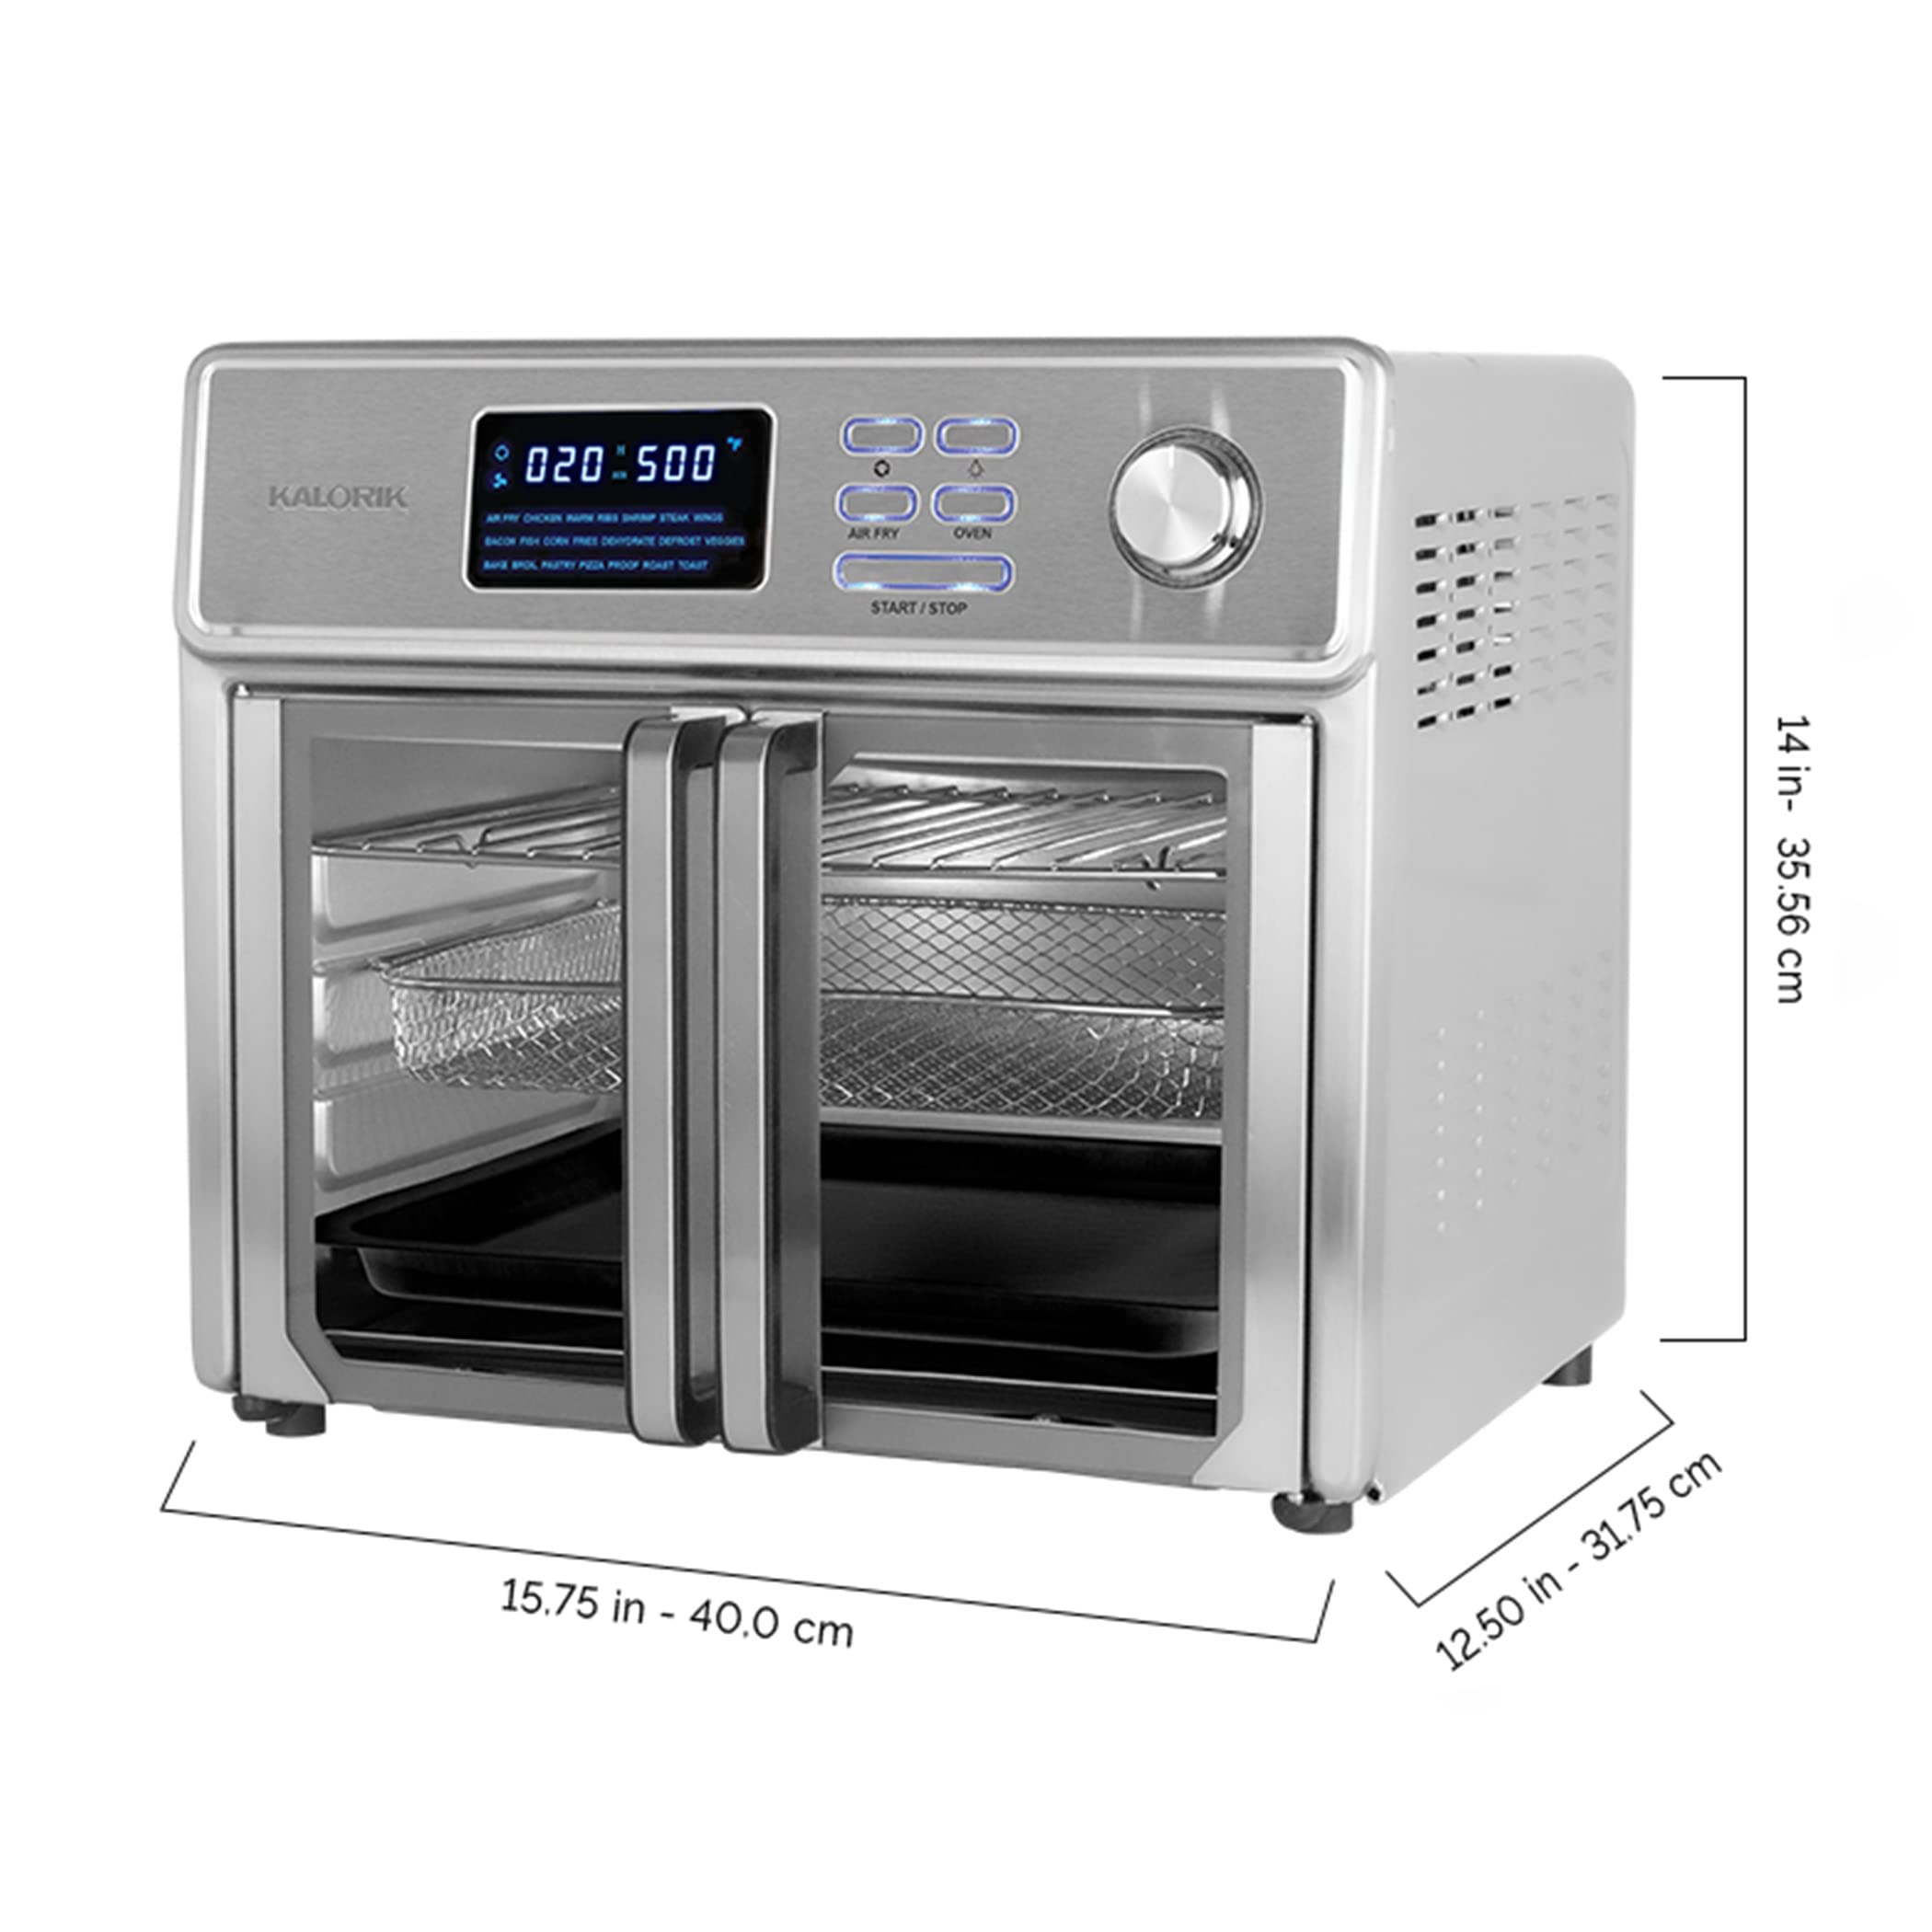 Kalorik® MAXX® Digital Air Fryer Oven, 26 Quart, 10-in-1 Countertop Toaster Oven & Air Fryer Combo-21 Presets up to 500 degrees, Includes 9 Accessories & Cookbook